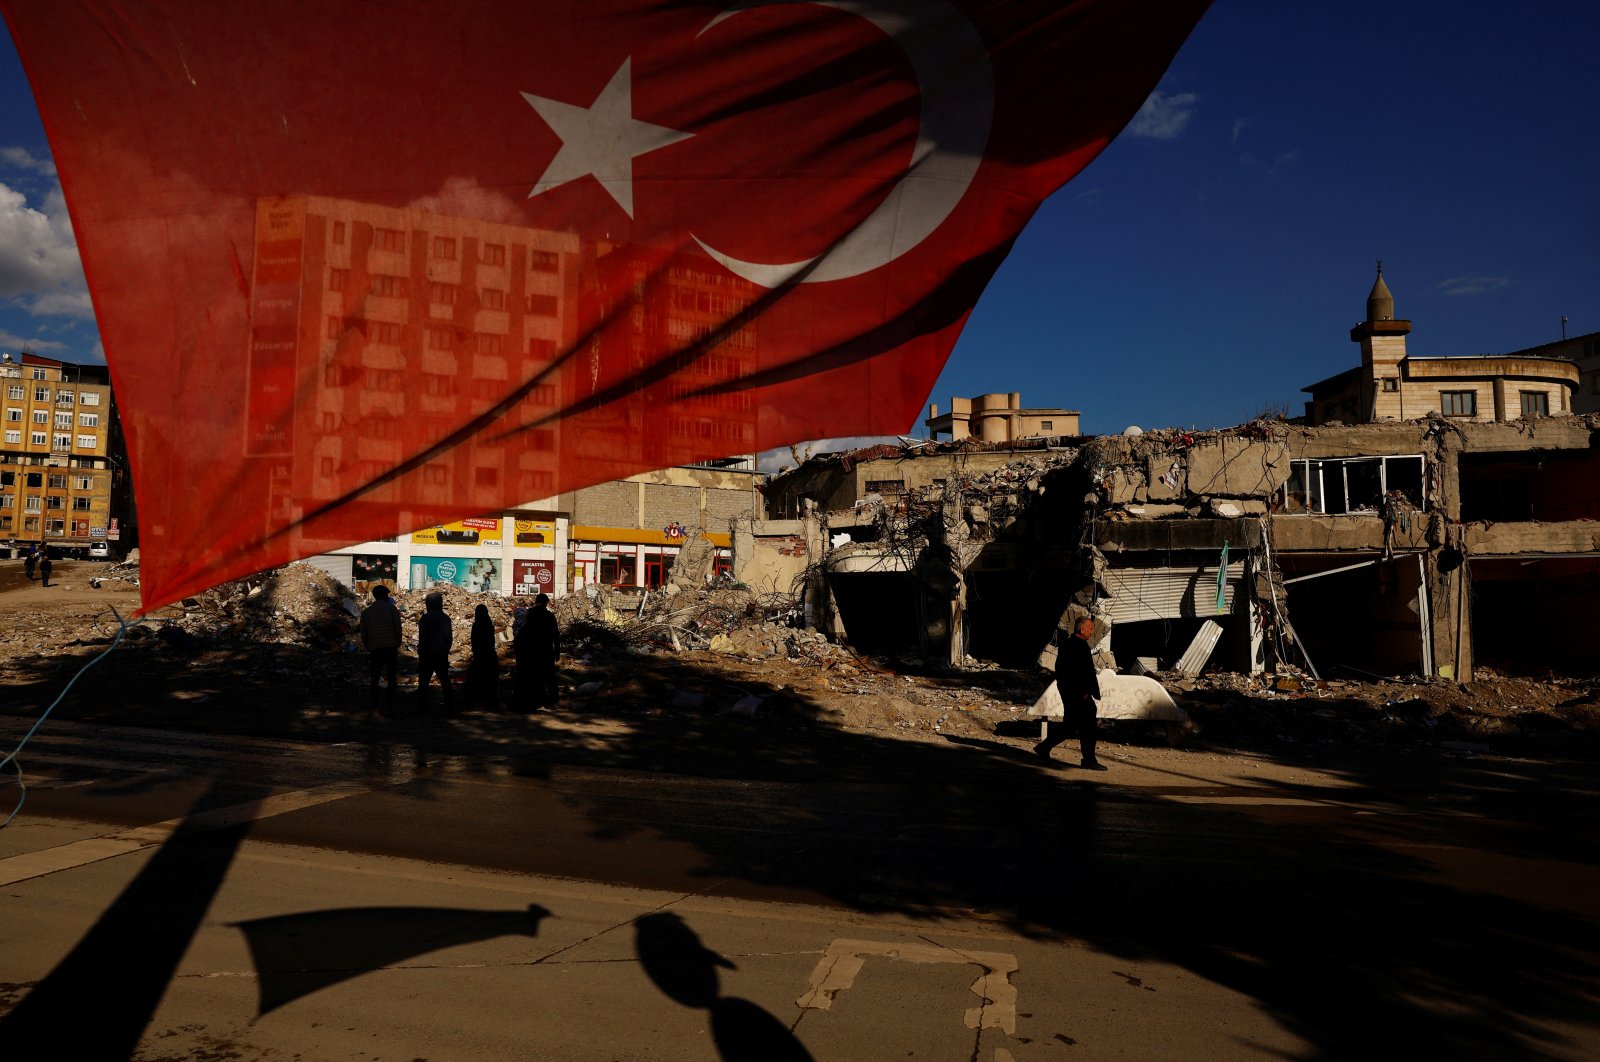 A Turkish flag flies next to damaged buildings in the aftermath of a deadly earthquake in Kahramanmaraş, Türkiye, March 9, 2023. (Reuters Photo)